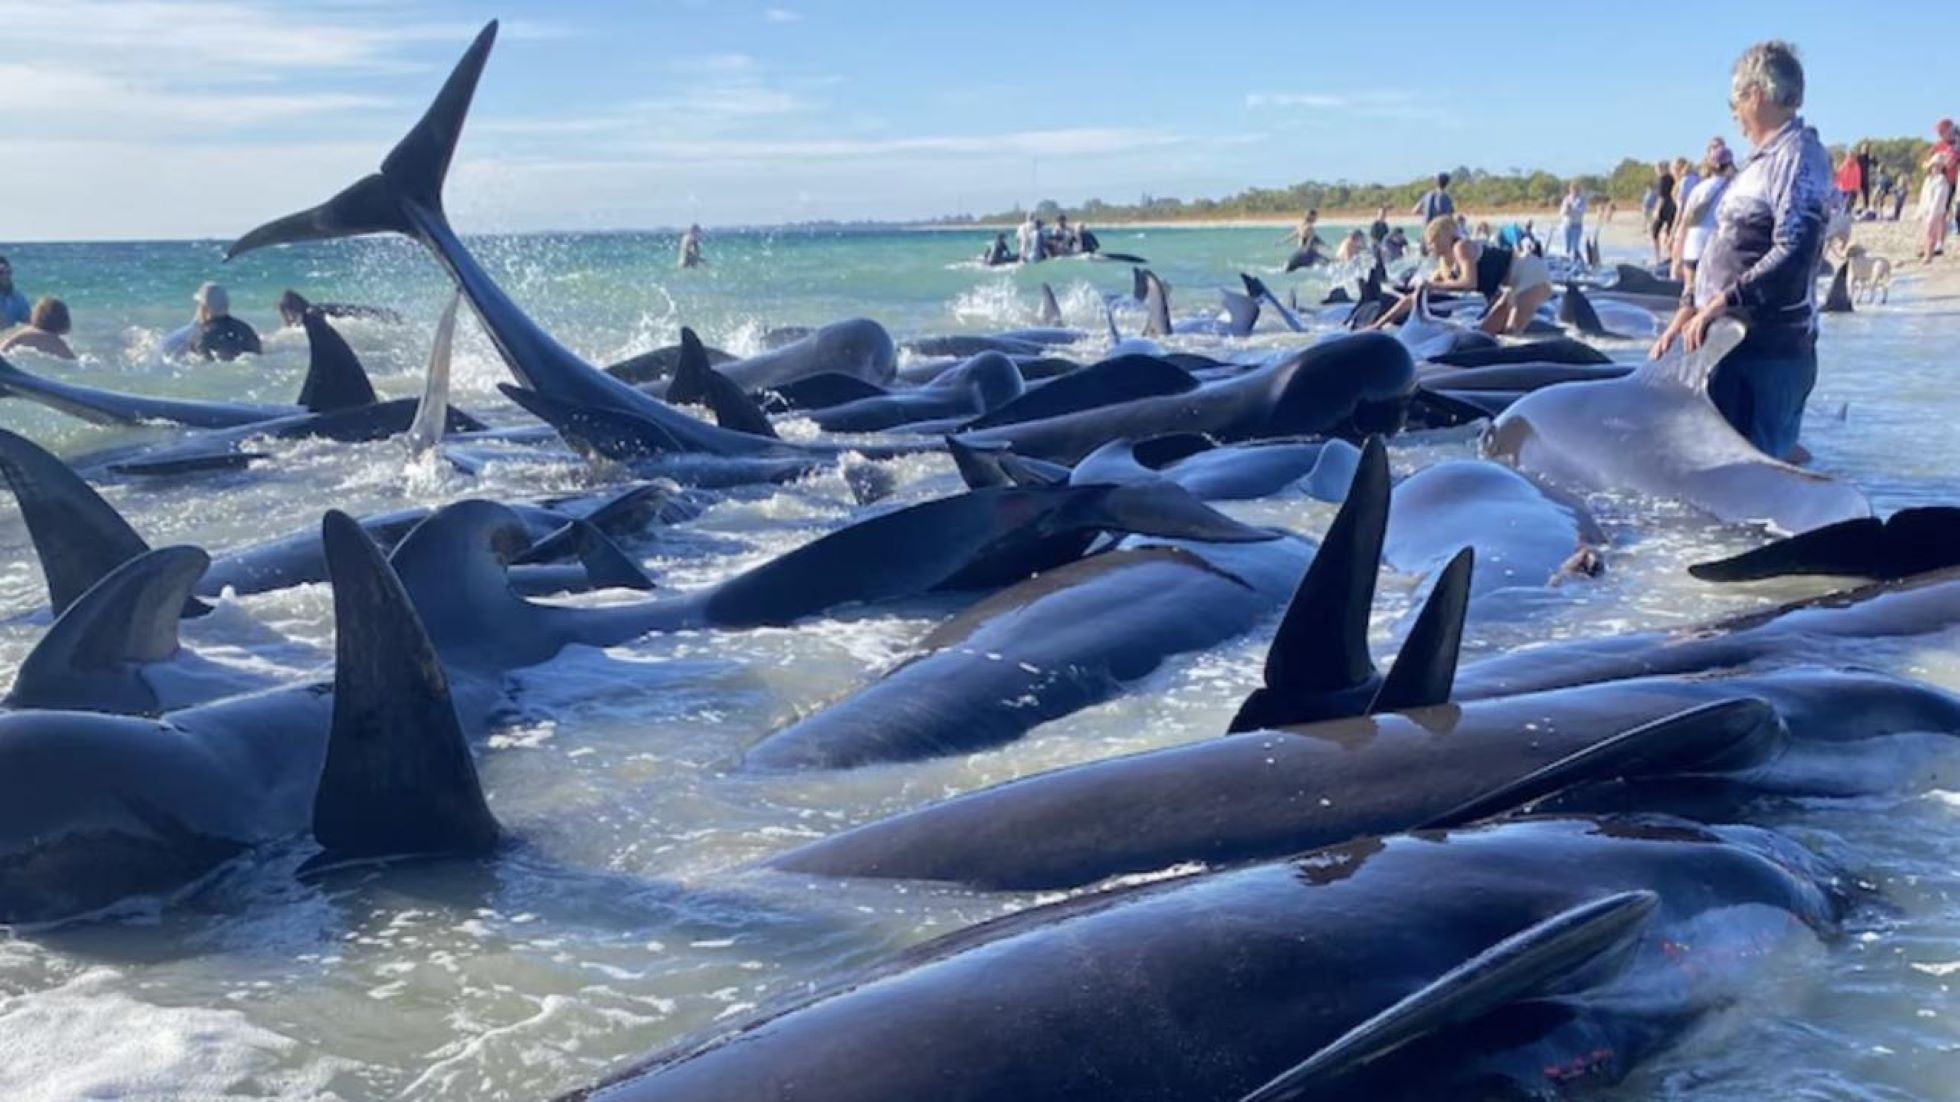 28 Of 160 Pilot Whales Perish In Western Australia After Mass Stranding